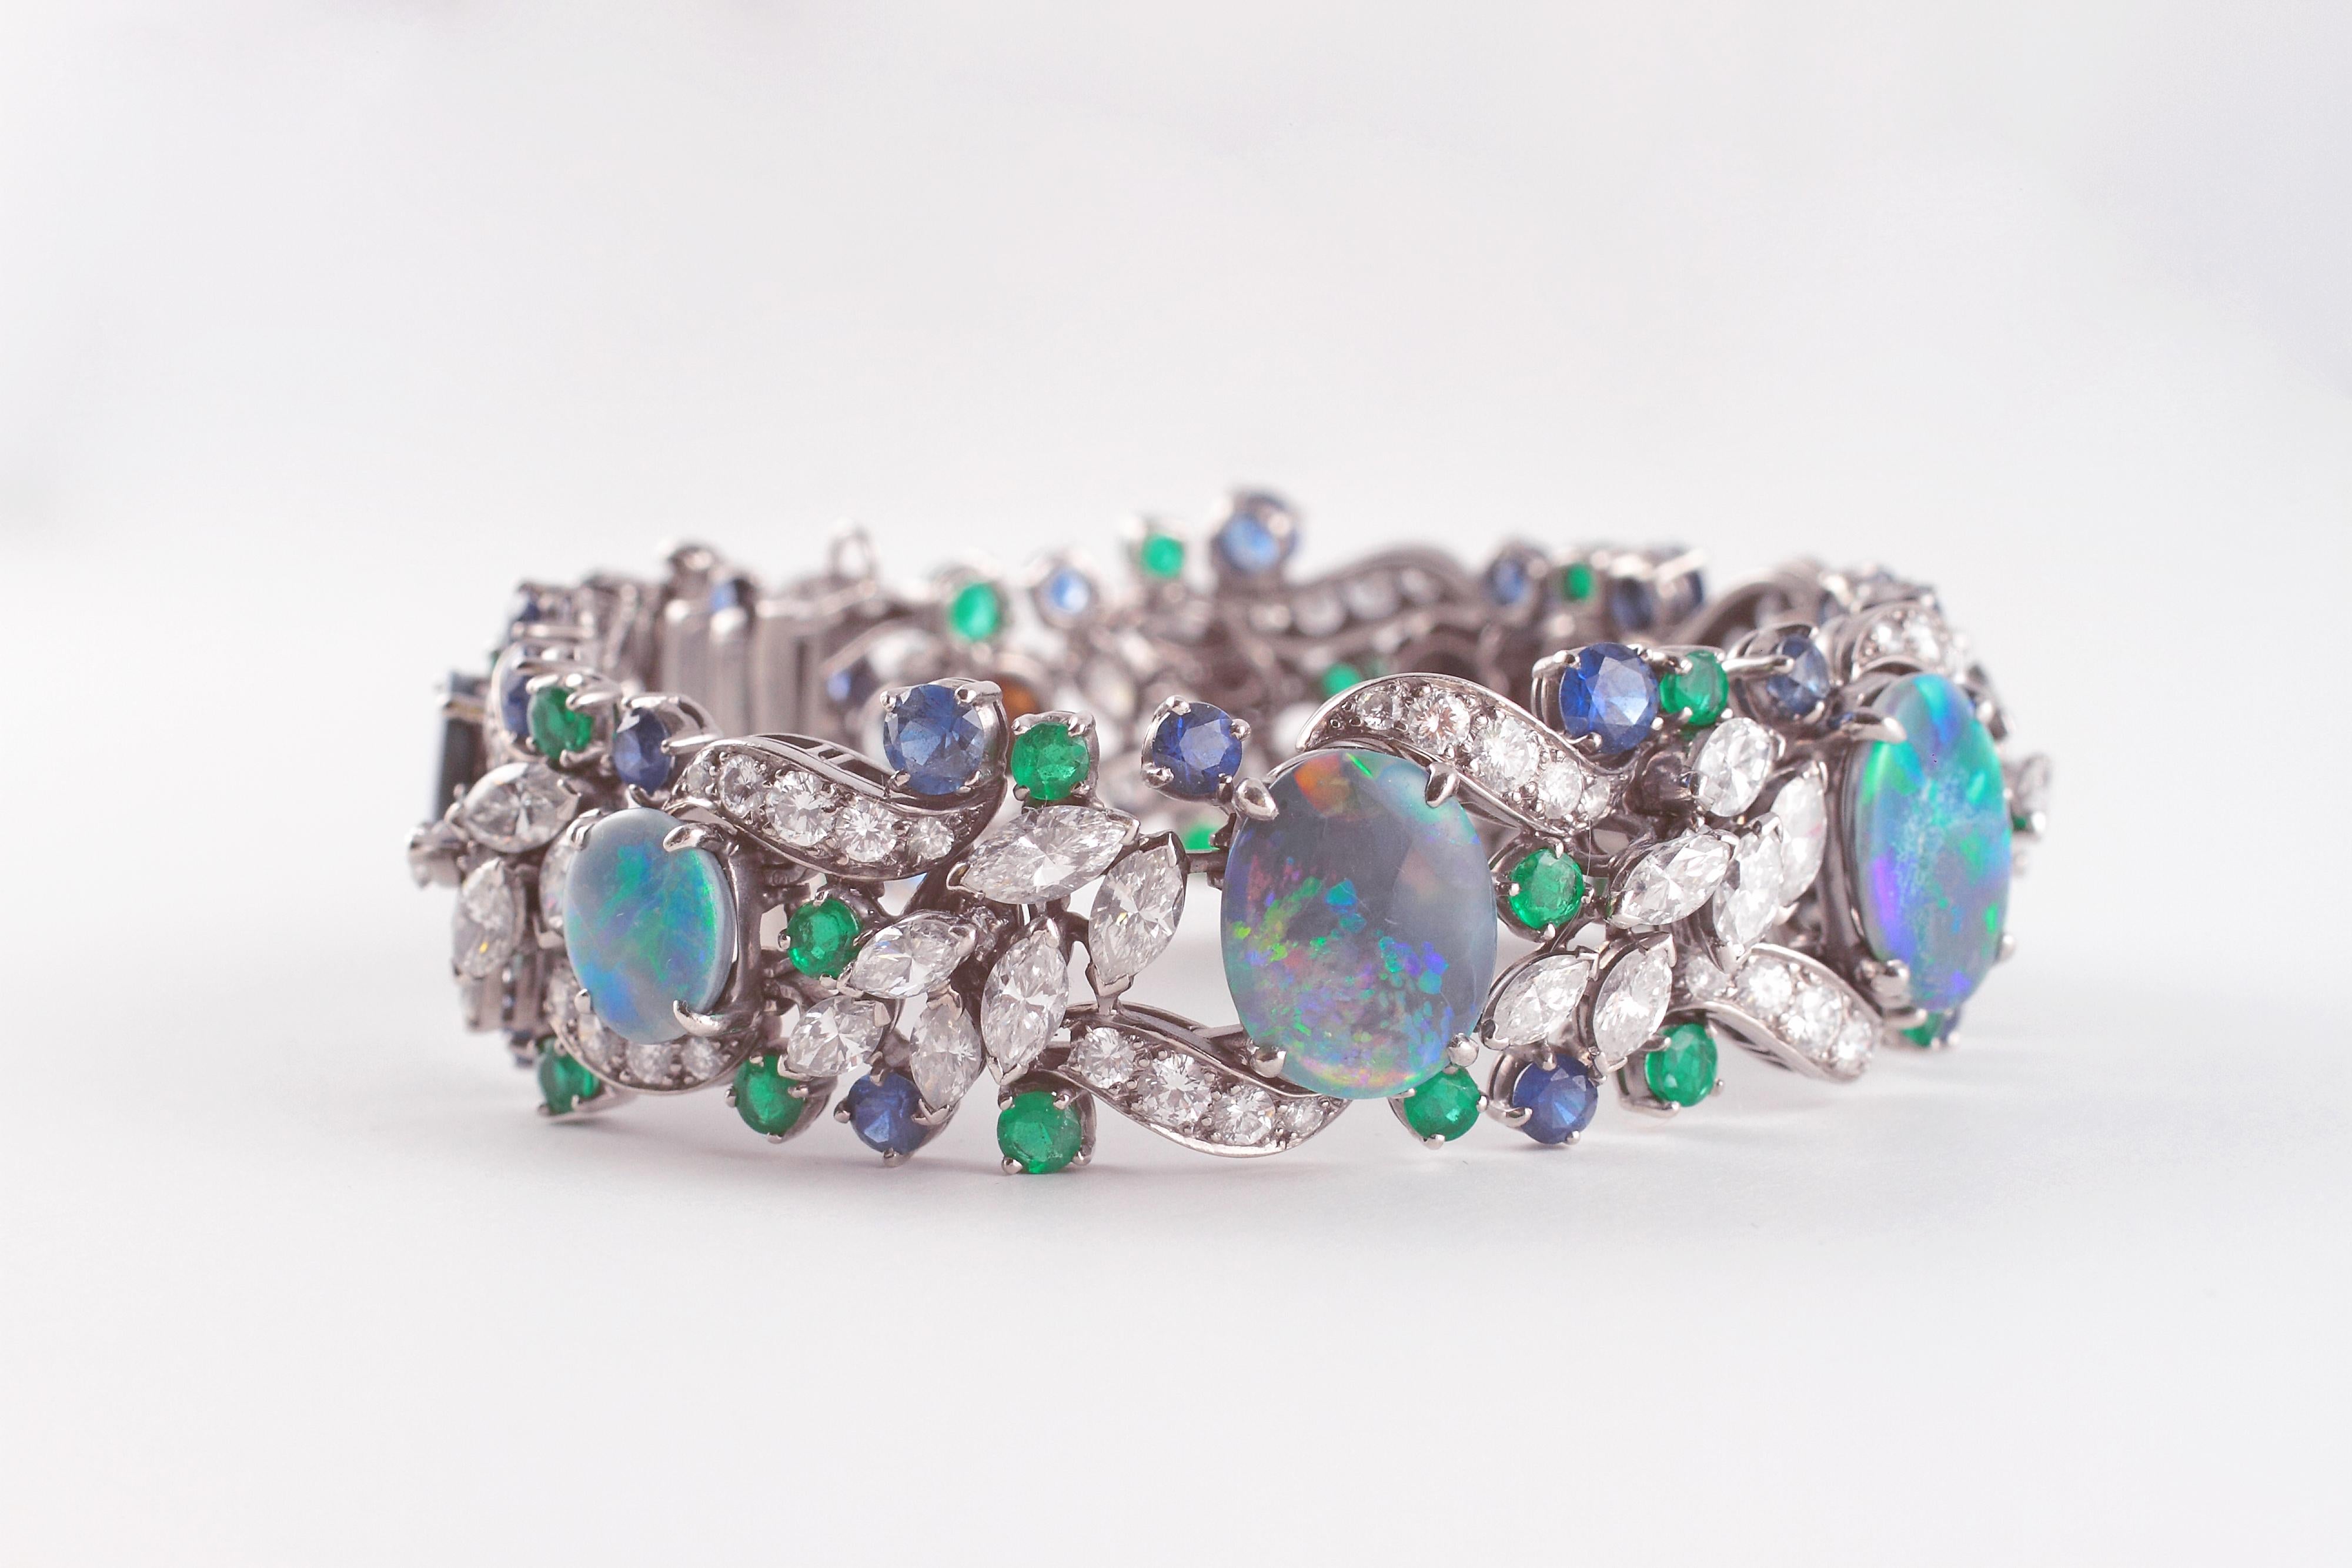 Breathtaking!  That is exactly what this bracelet is!  By famed jewelry house Oscar Heyman, this splendid platinum bracelet supports 44 marquise diamonds with a total weight of 8.87 carats, 25 round sapphires at 6.11 carats total weight, 31 round